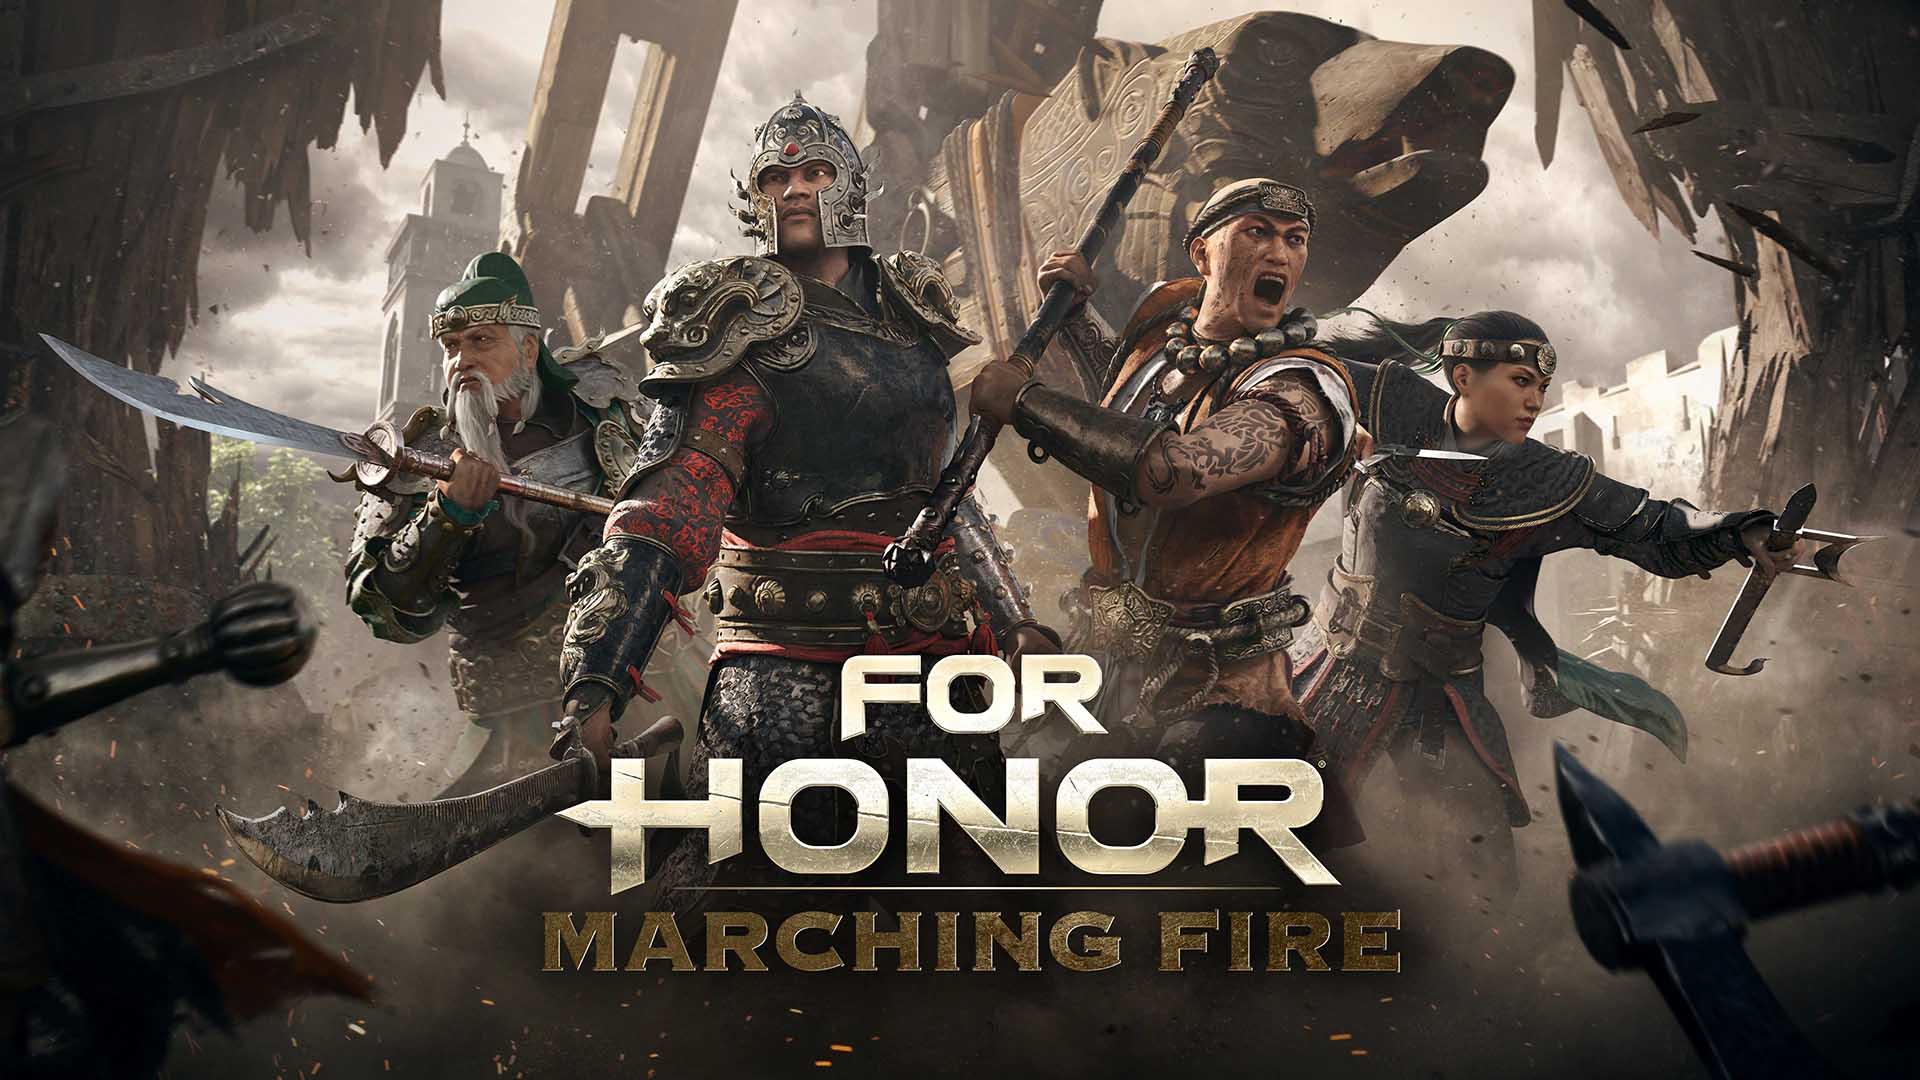 For Honor Marching Fire